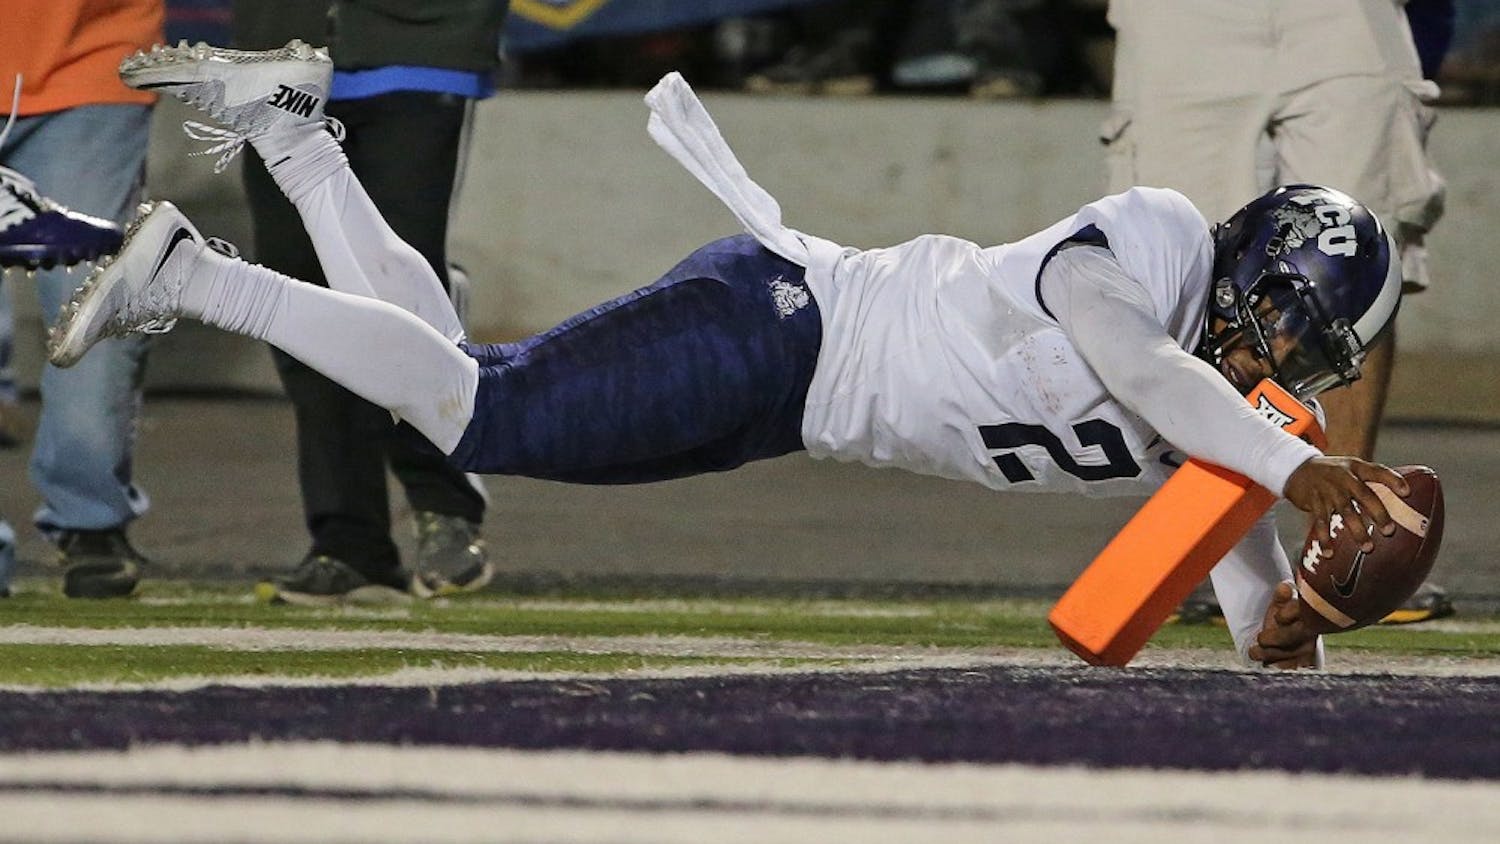 TCU quarterback Trevone Boykin (2) dives into the Kansas State end zone with a touchdown on a 14-yard run in the fourth quarter at Snyder Family Stadium in Manhattan, Kan., on Saturday, Oct. 10, 2015. TCU won, 52-45. (Paul Moseley/Fort Worth Star-Telegram/TNS)